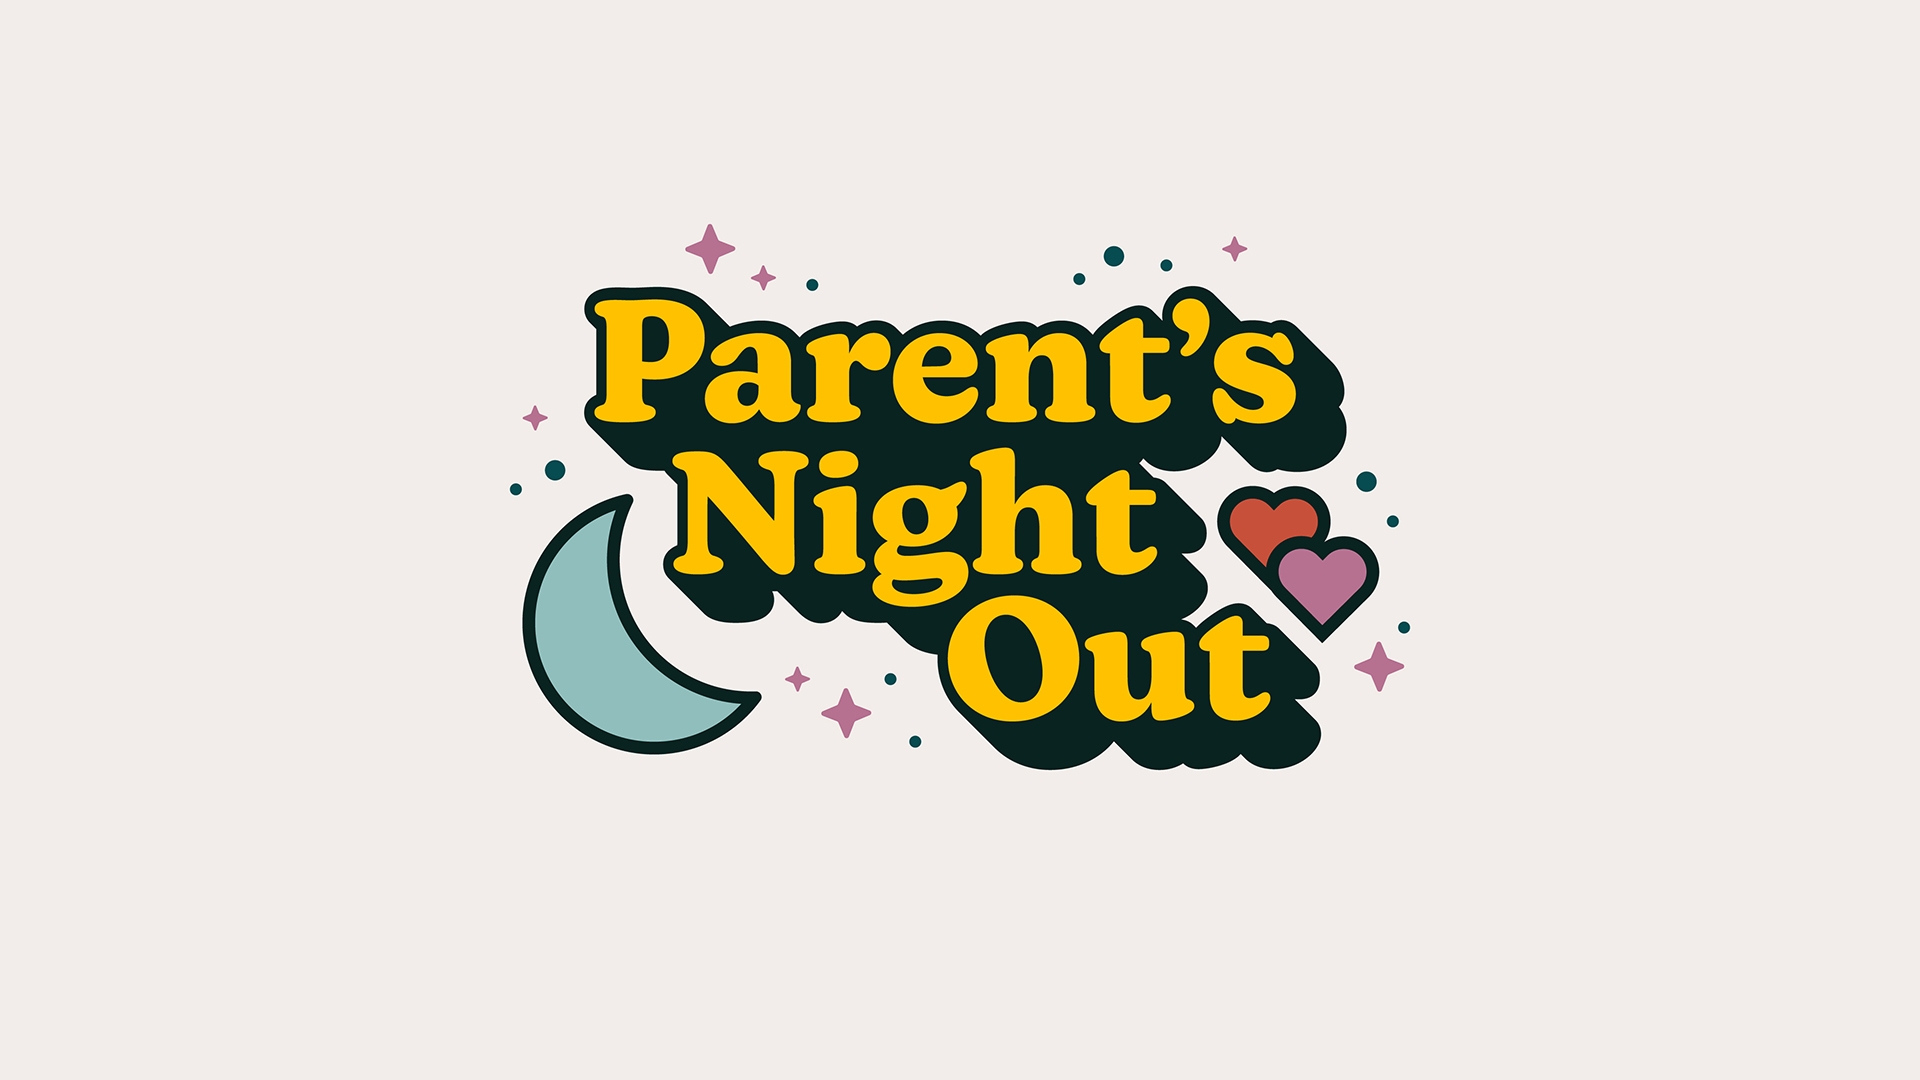 Parent's night out